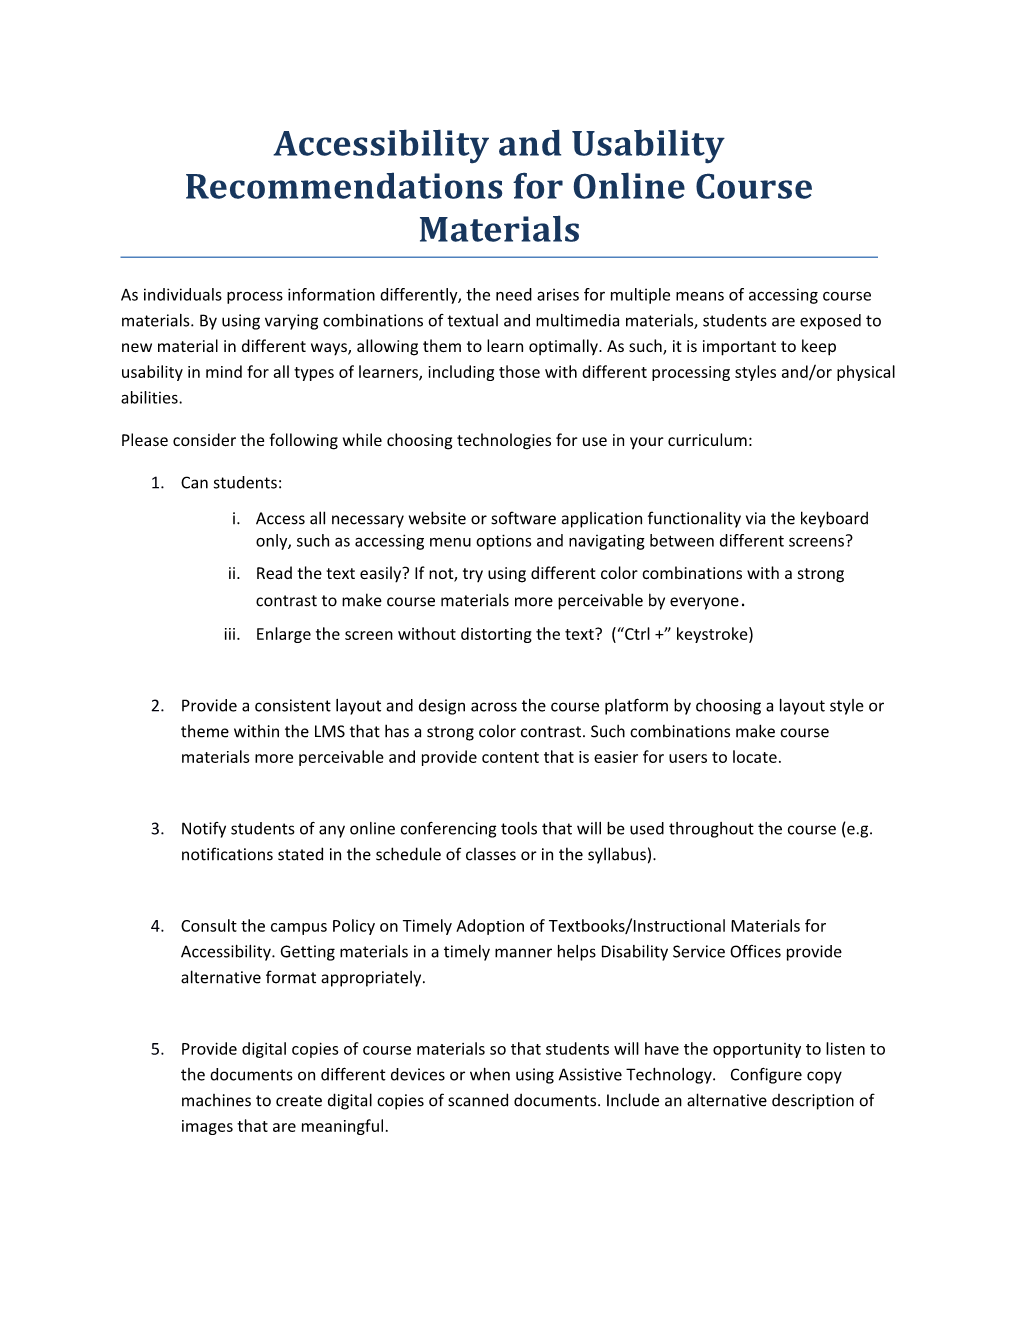 Accessibility and Usability Recommendations for Online Course Materials